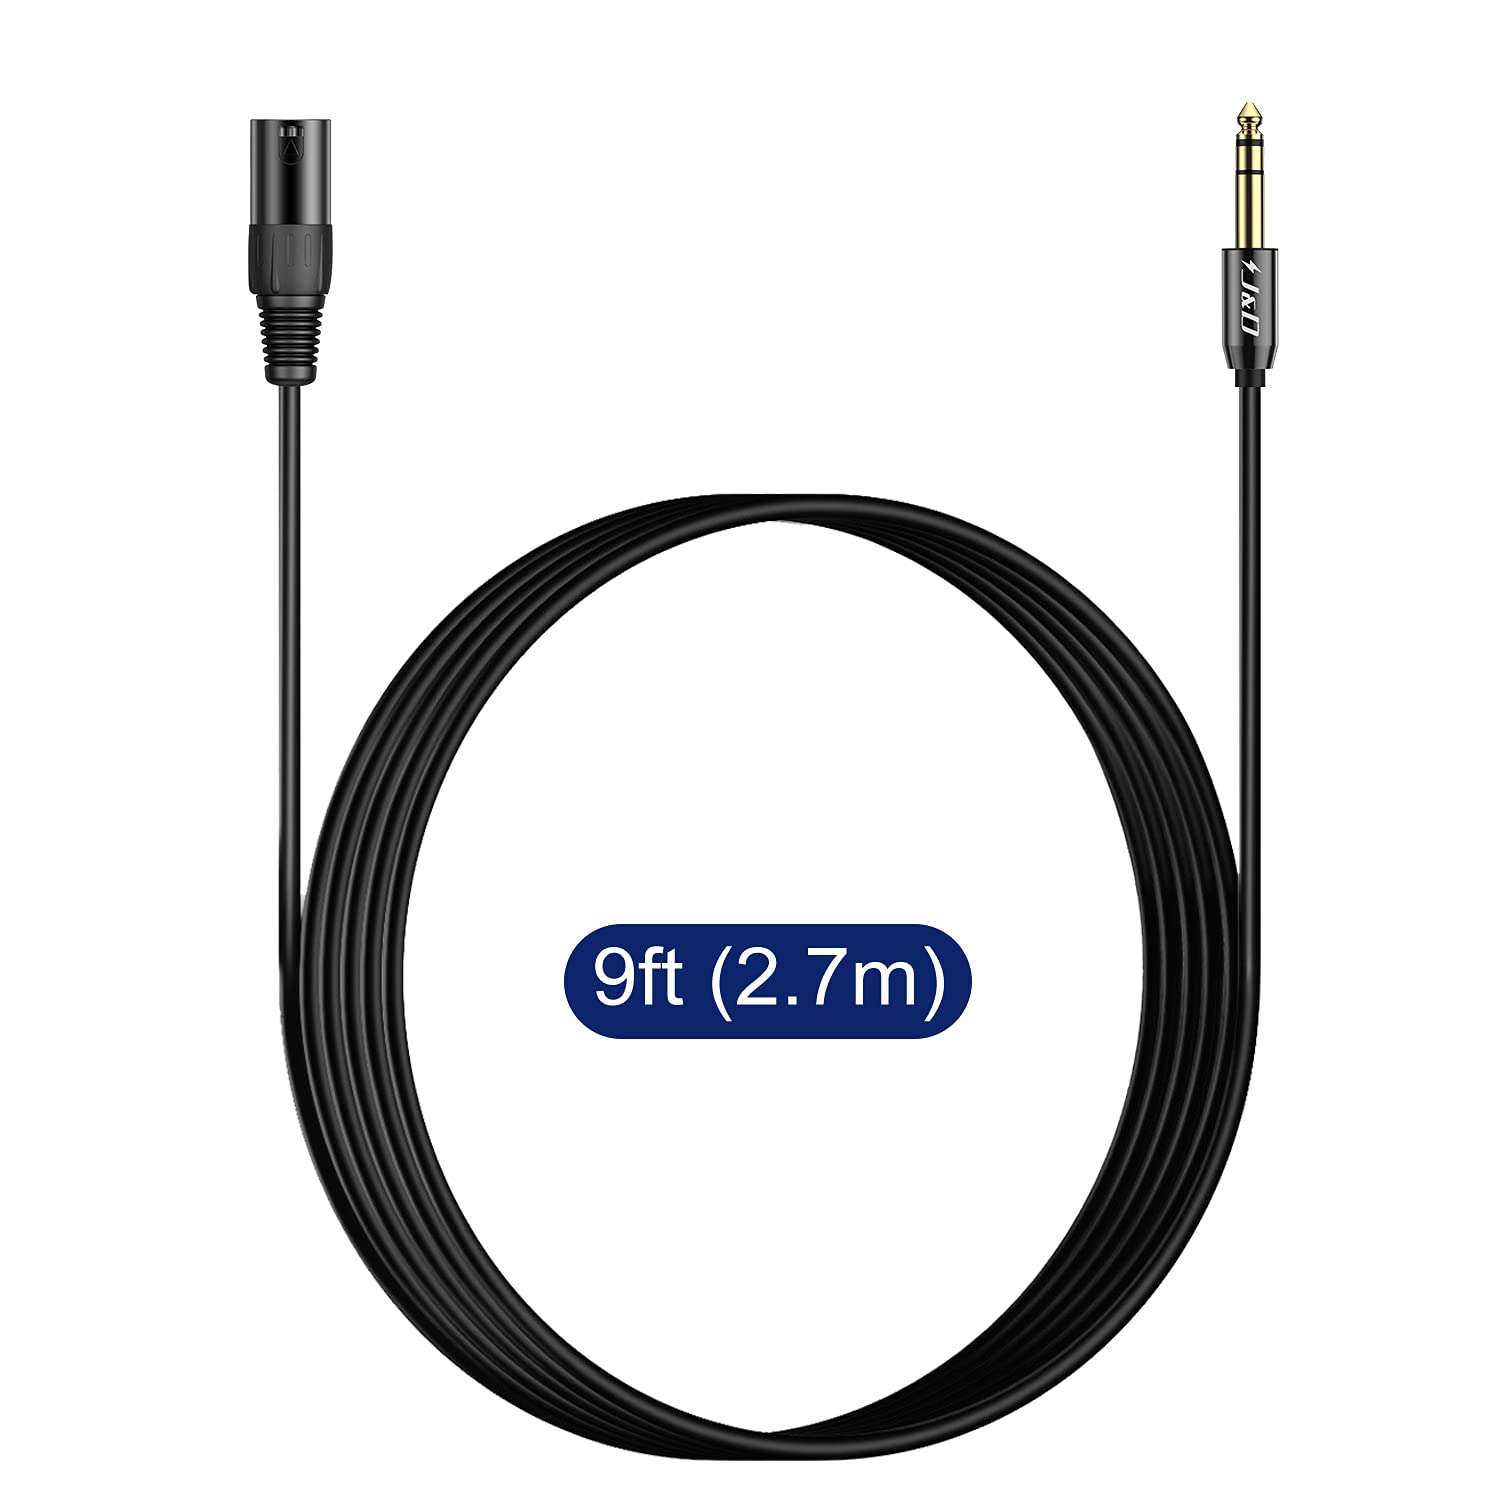 TRS 6.35 mm to XLR Male to Male Balanced Interconnect Cable